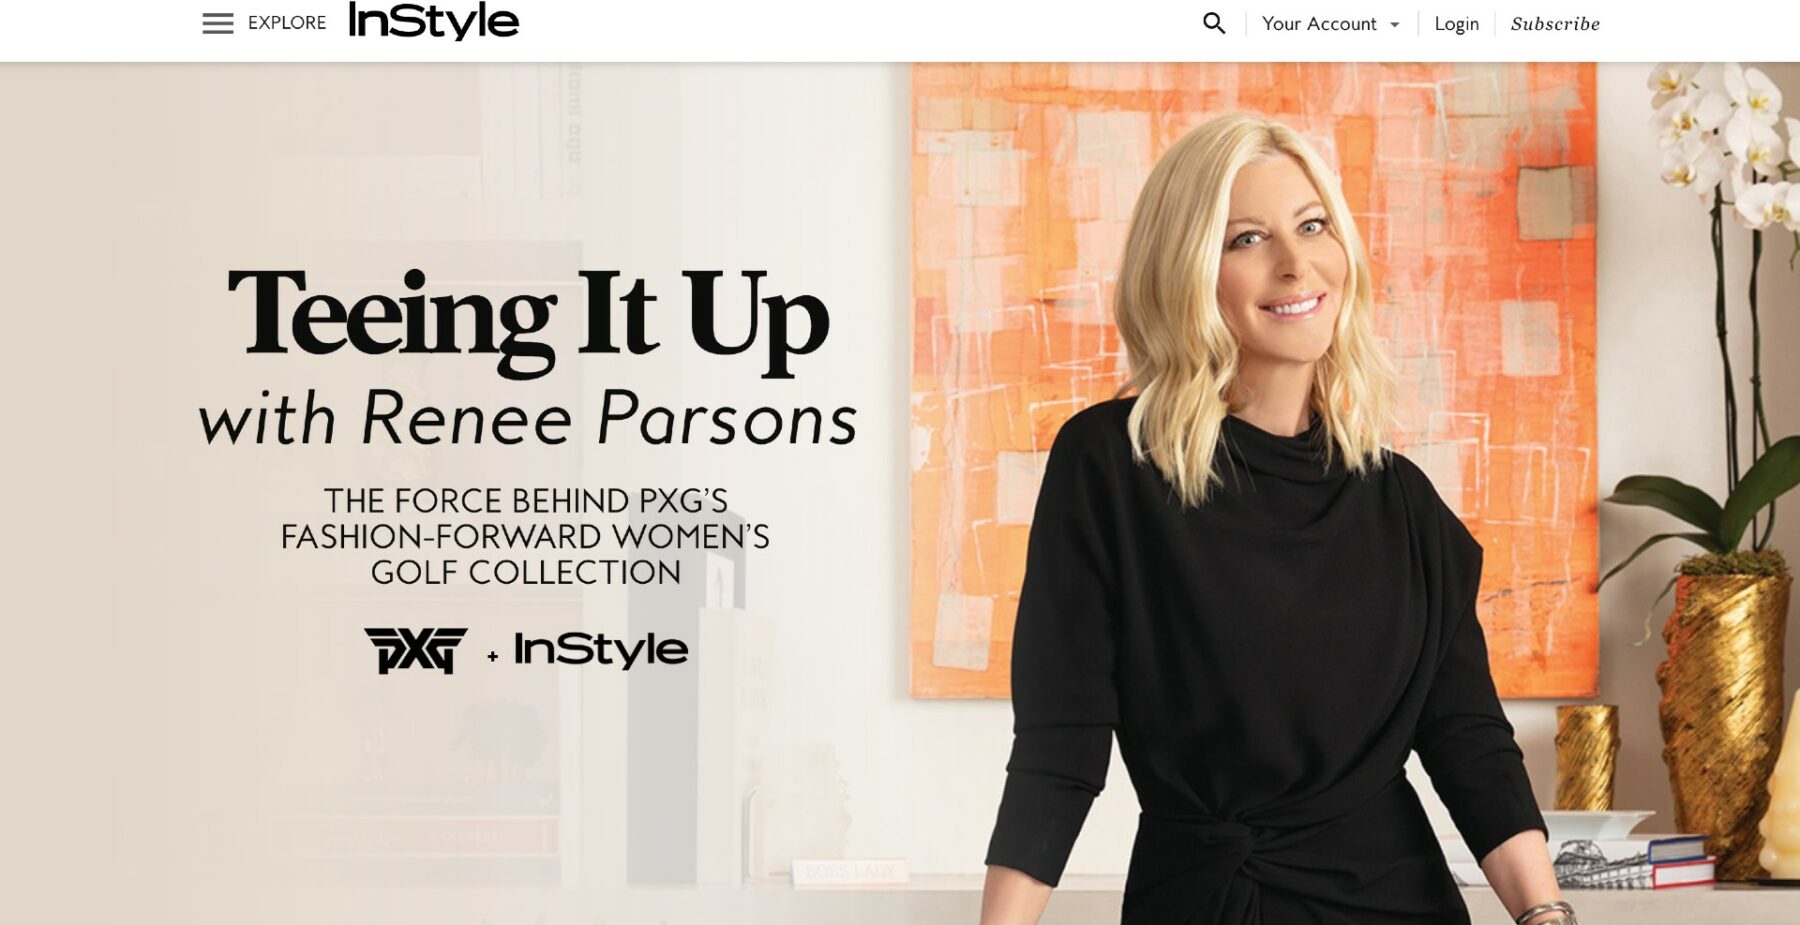 Screenshot of InStyle Renee Parsons article cover page